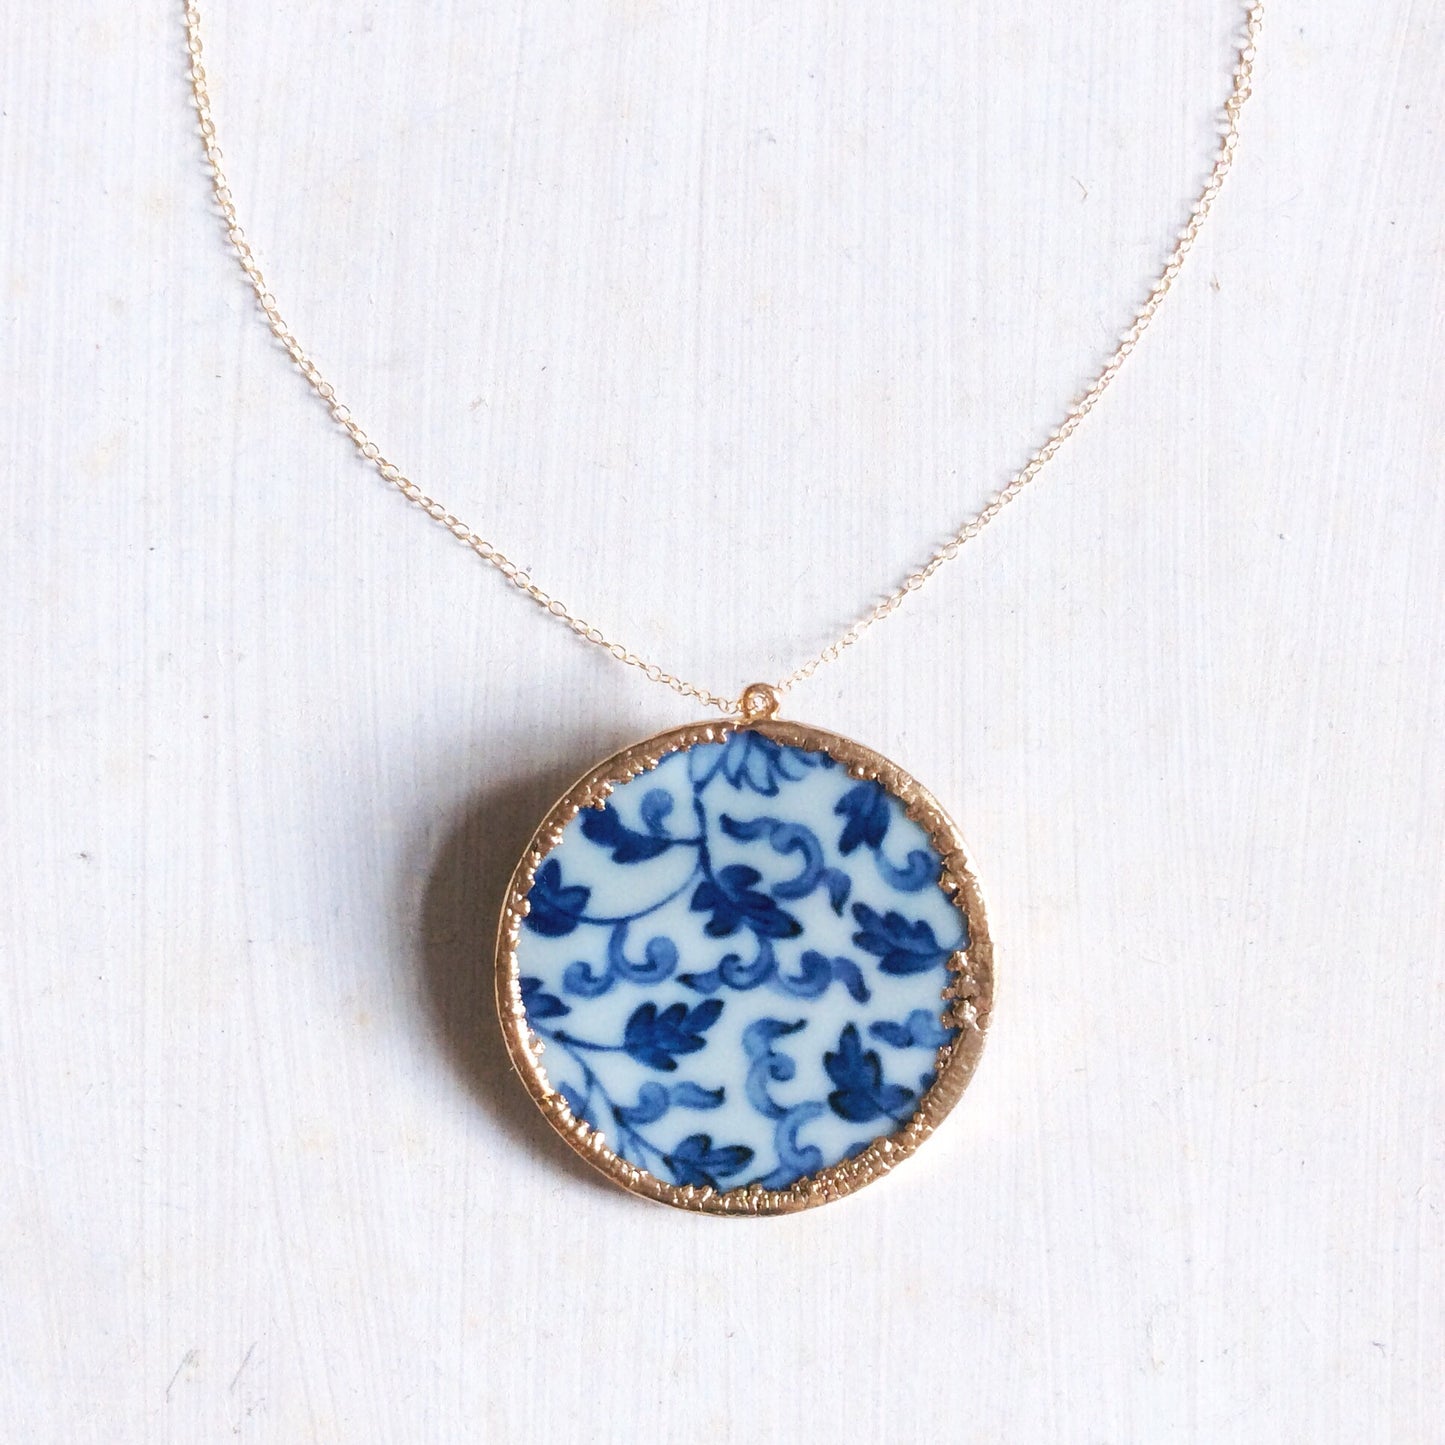 Chinoiserie Blue And White Porcelain Brooch / Necklace